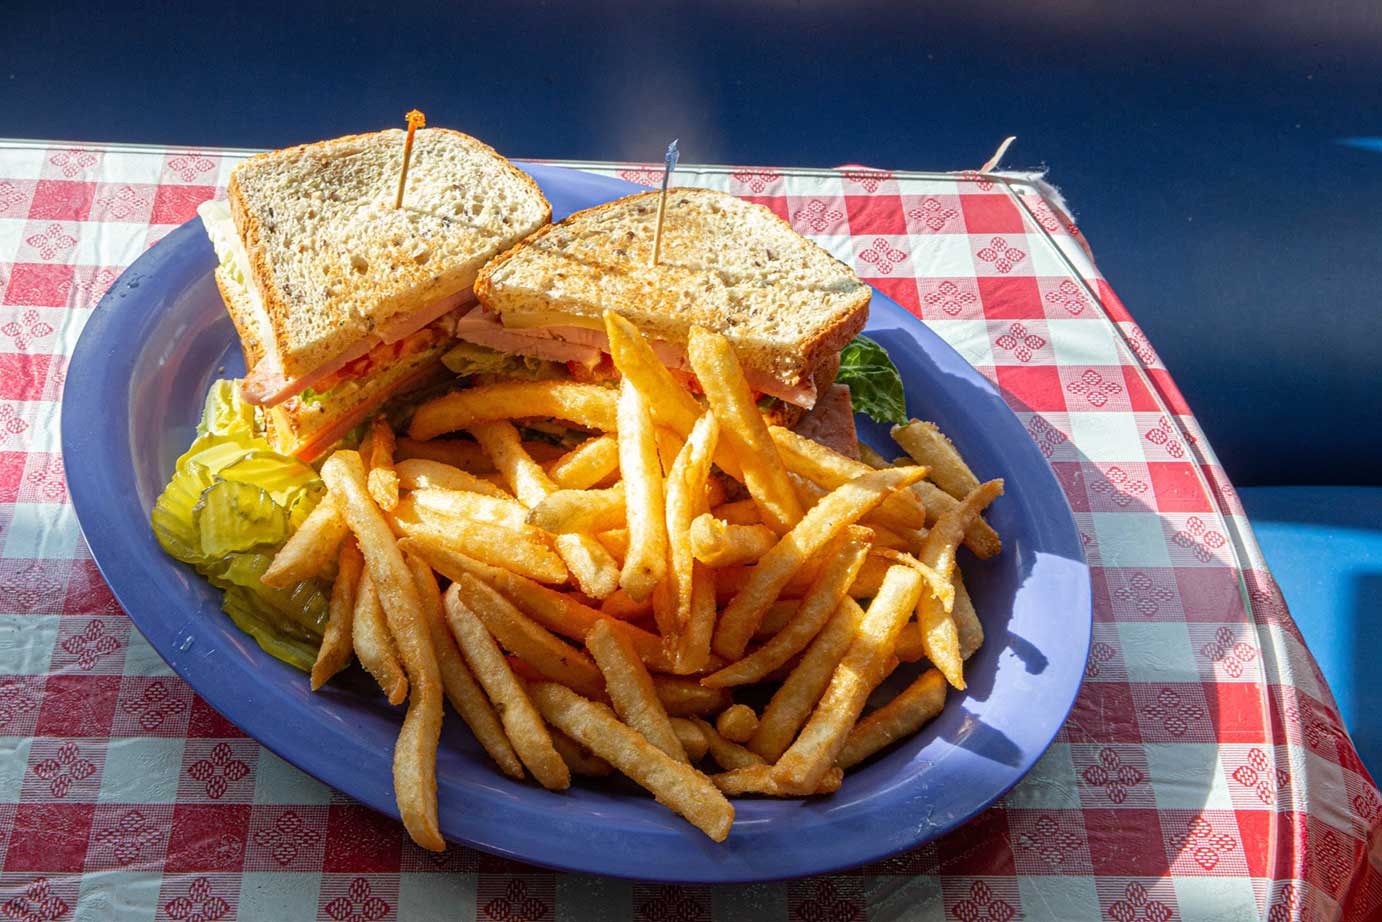 Sandwich with french fries